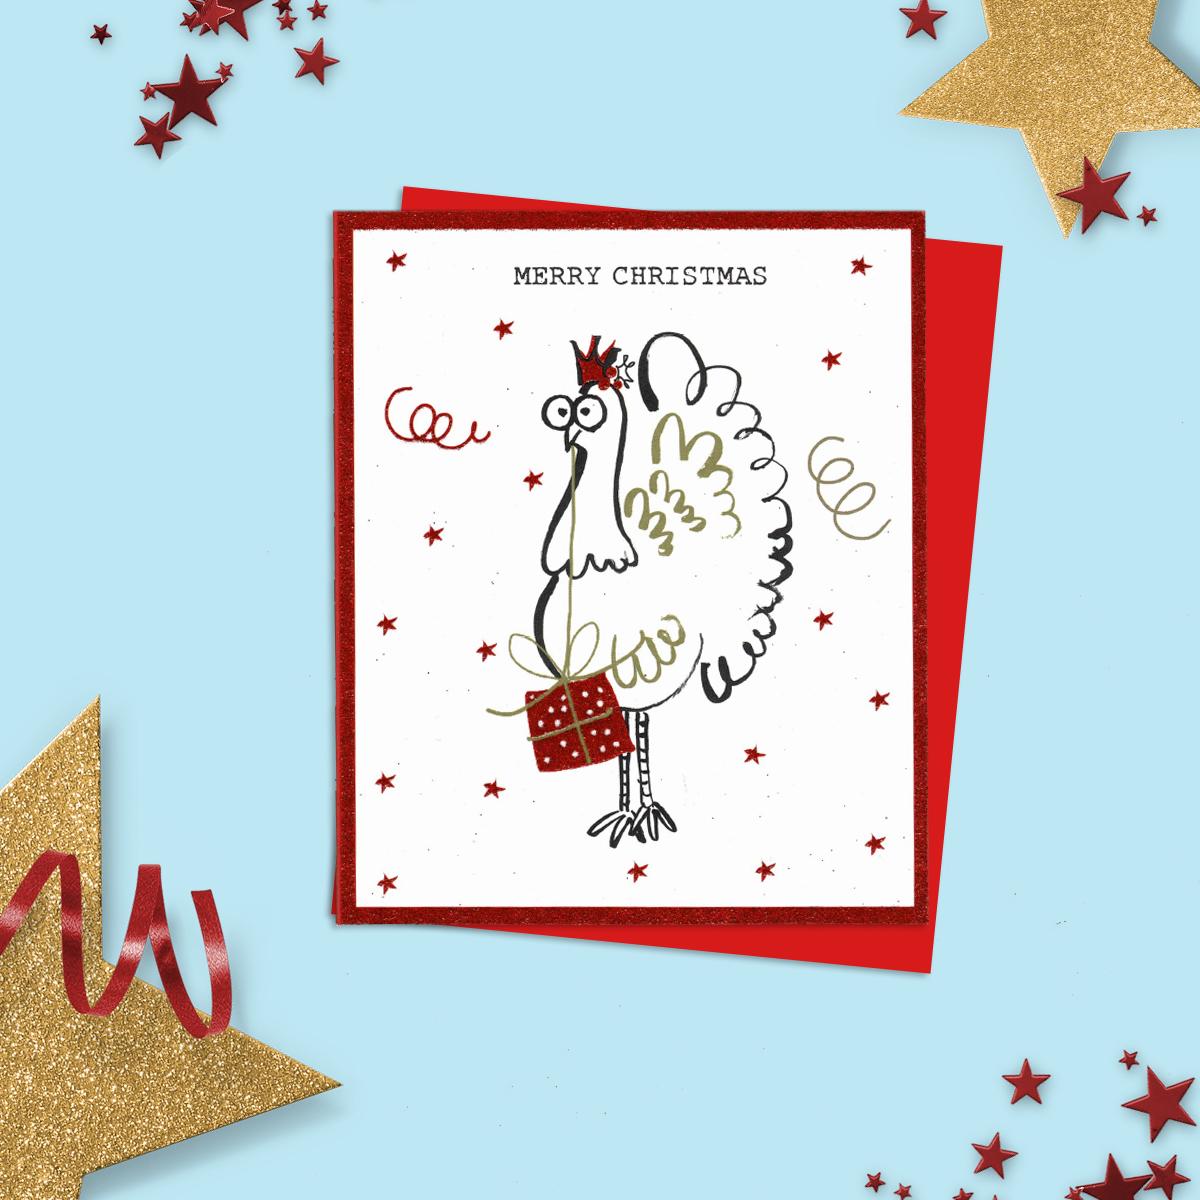 General Christmas Card Featuring A Doodled Turkey With A Christmas Gift! Added Red Glitter And Red Envelope To Finish